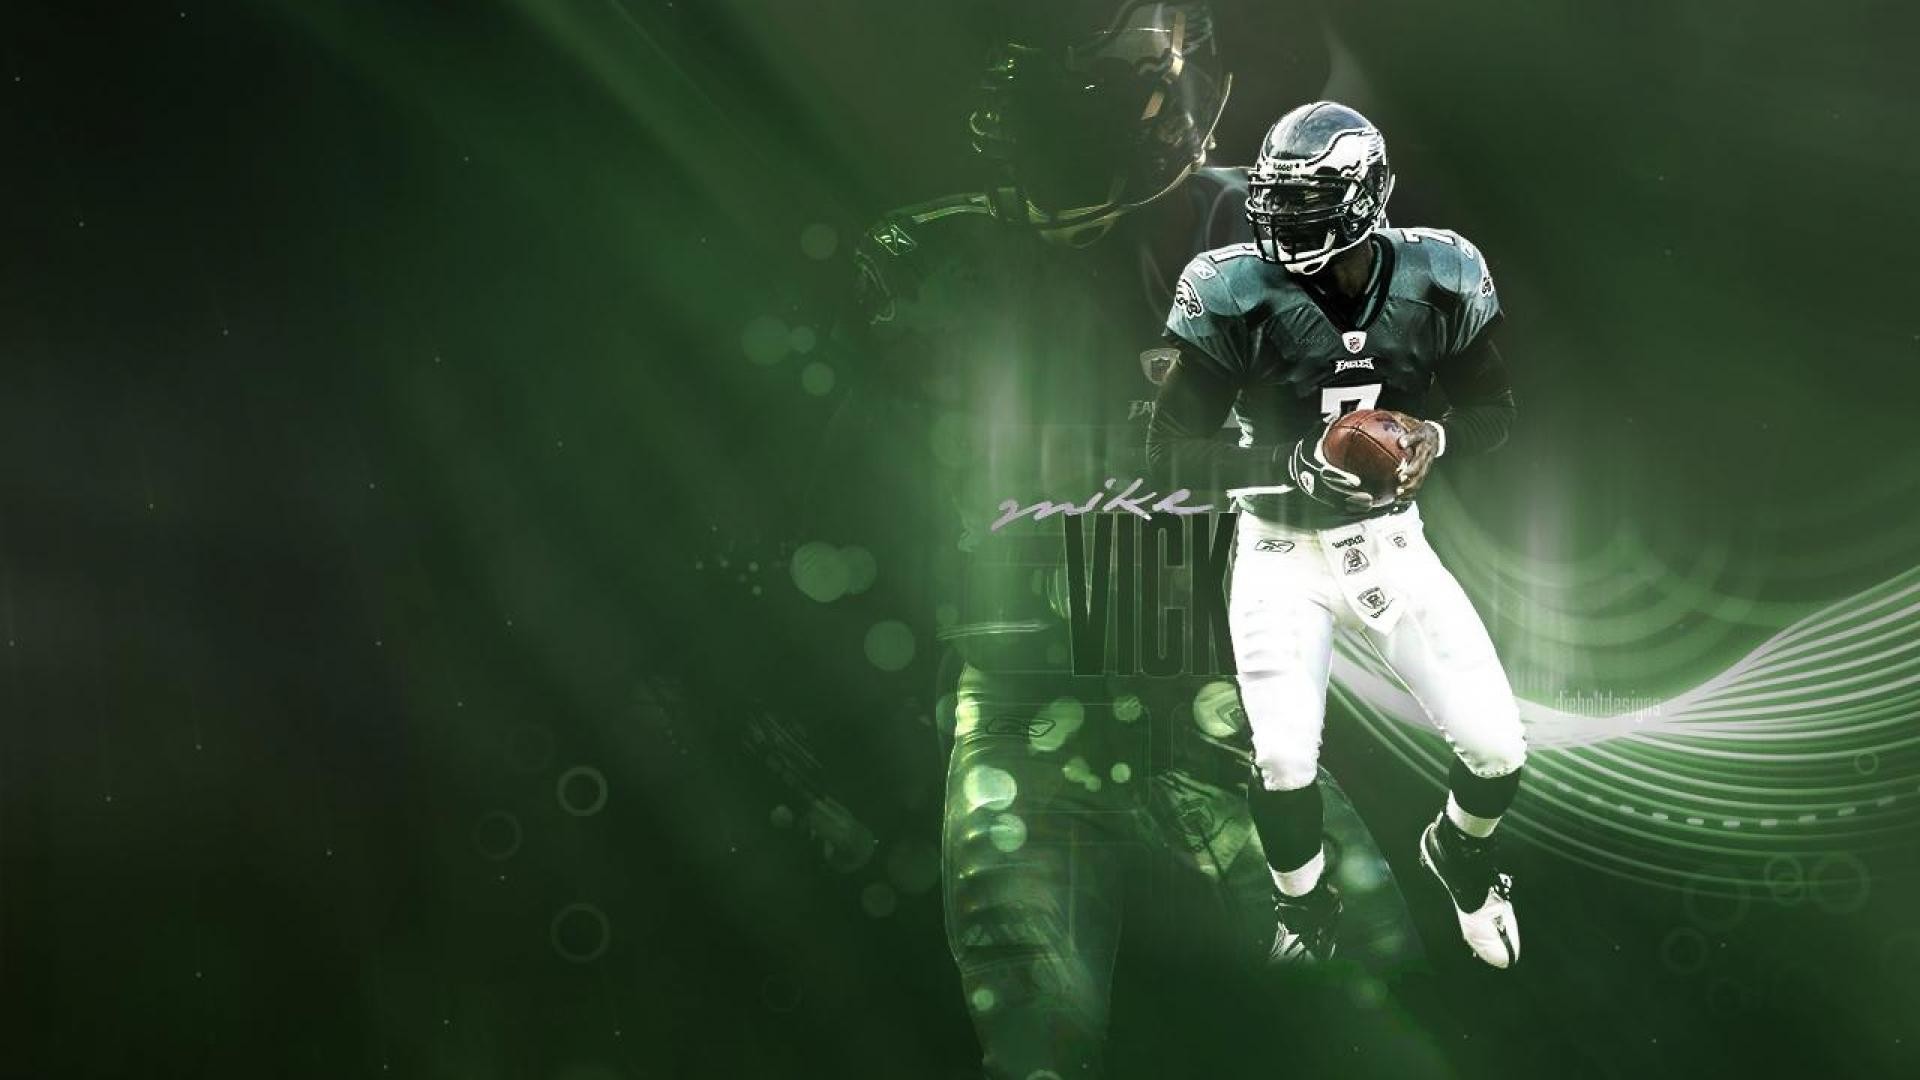 Download NFL great Michael Vick on the field in his prime Wallpaper   Wallpaperscom